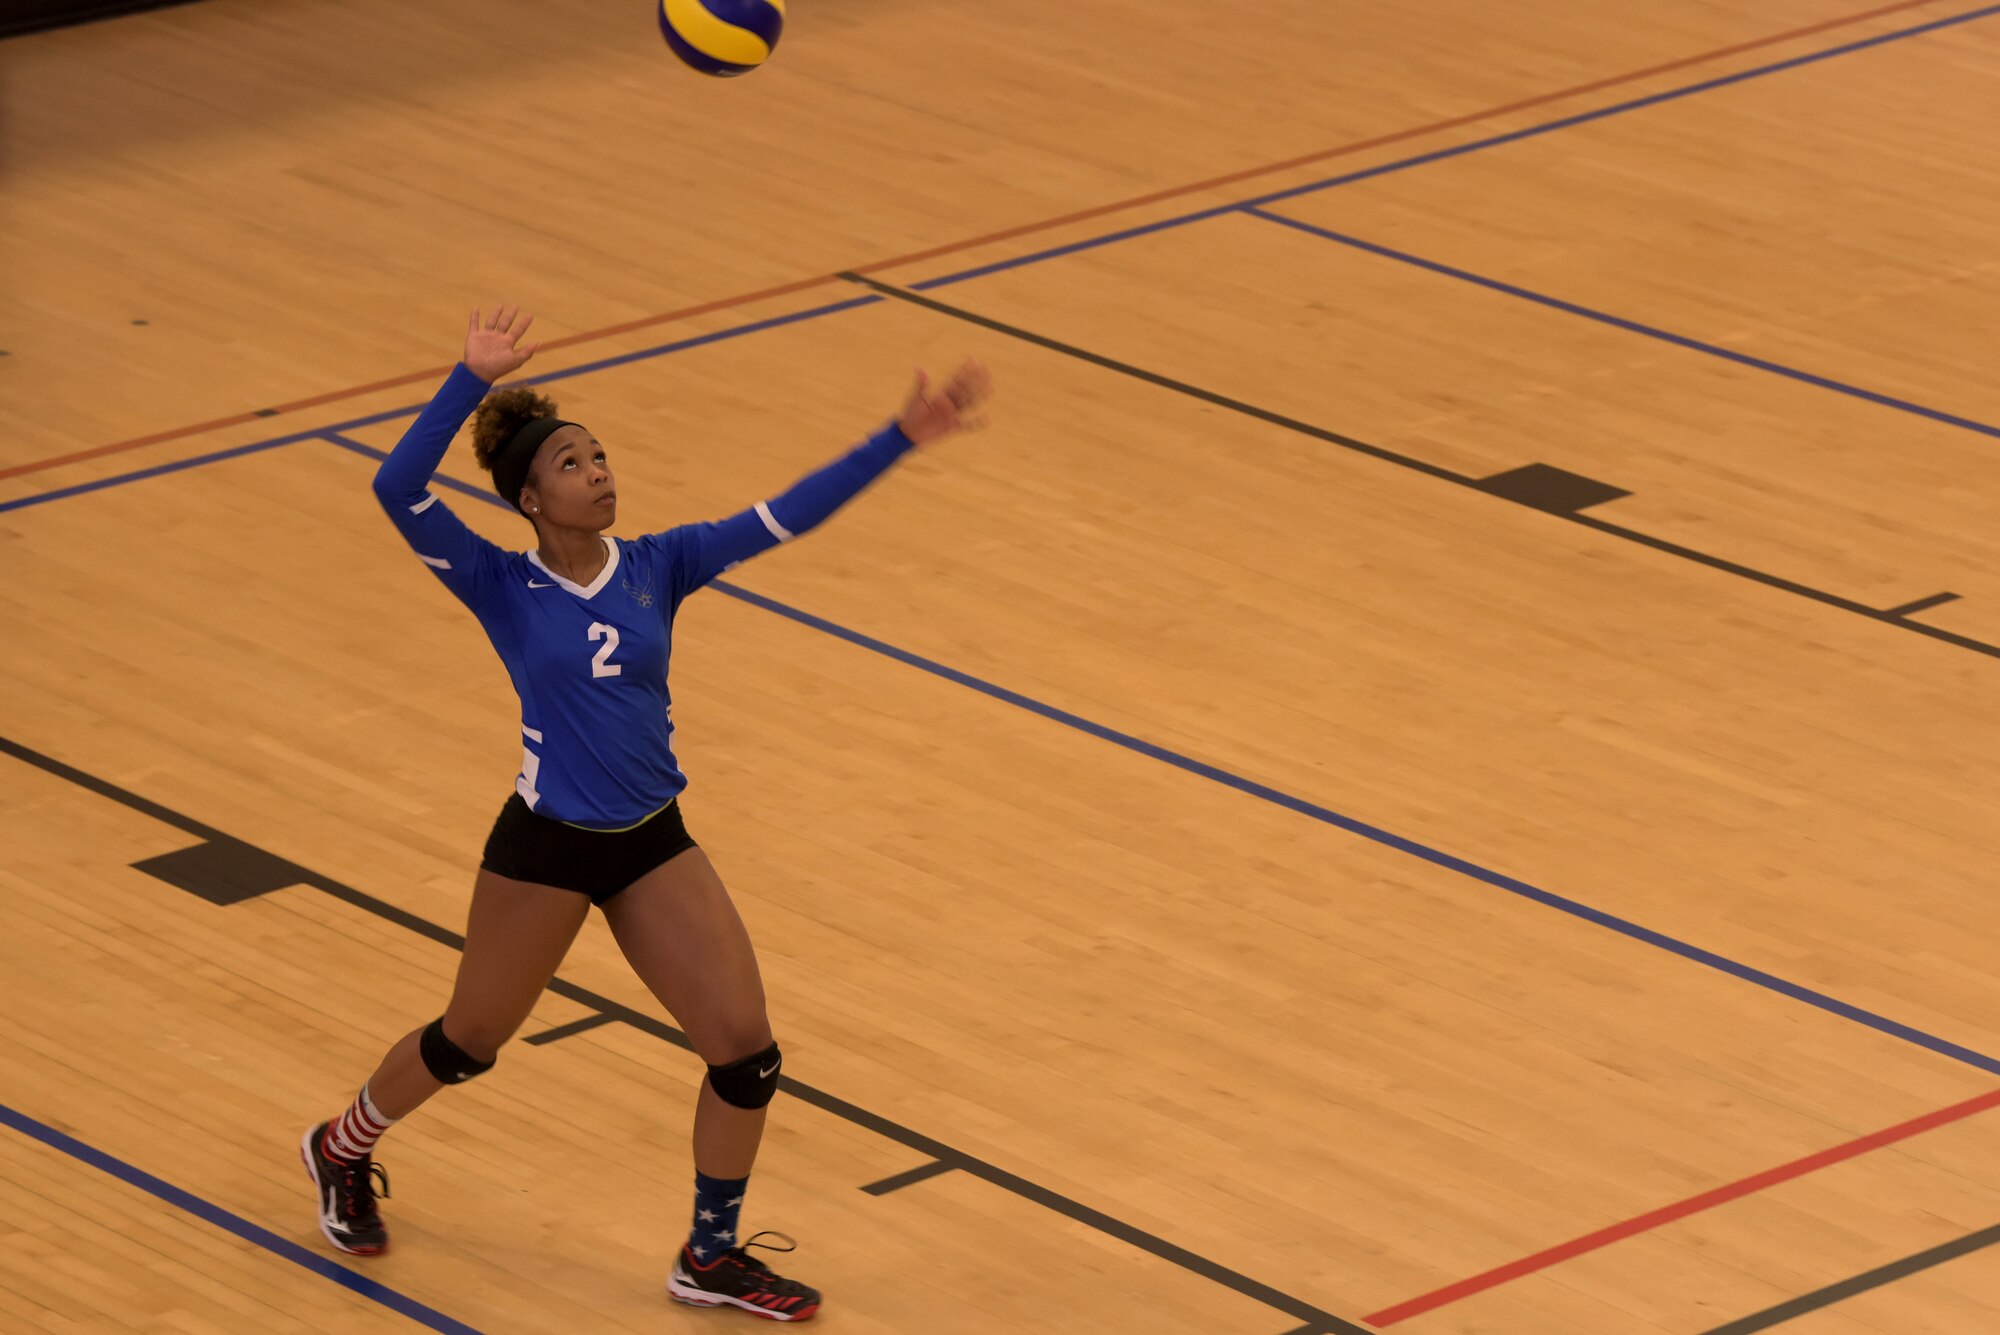 A member of the United States Air Forces in Europe women’s volleyball team serves during the 2020 Allied Air Command Inter-Nation Volleyball Championship at RAF Mildenhall, England, Feb. 20, 2020. Male and female volleyball teams representing air forces from the United States, Germany, the United Kingdom, Poland, Belgium and the Netherlands took part in NATO’s 2020 Allied Air Command Inter-Nation Volleyball Championship. (U.S. Air Force photo by Senior Airman Benjamin Cooper)